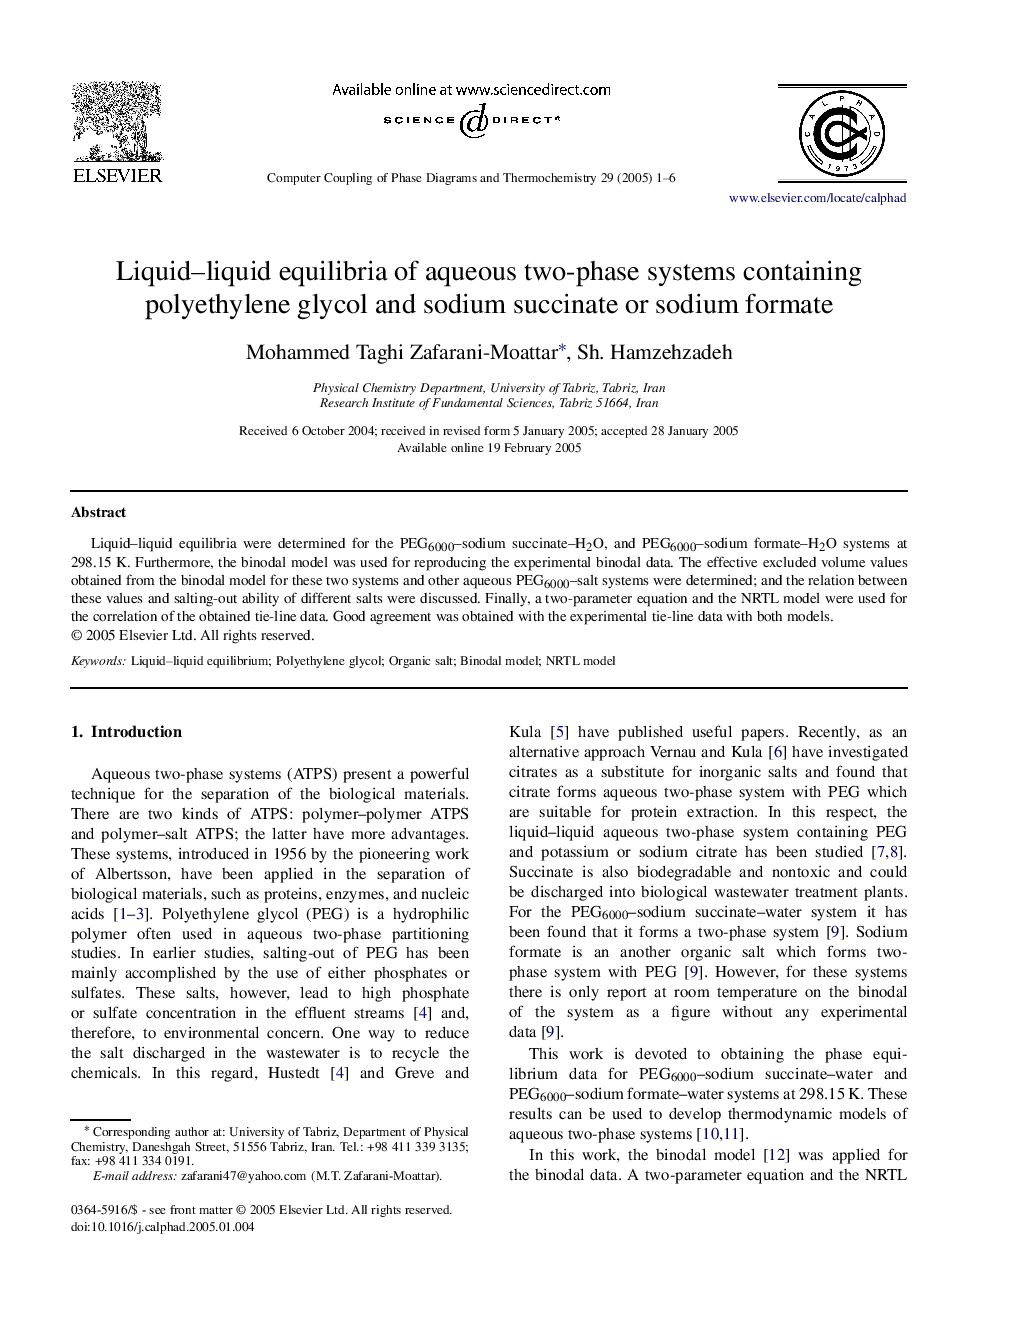 Liquid-liquid equilibria of aqueous two-phase systems containing polyethylene glycol and sodium succinate or sodium formate